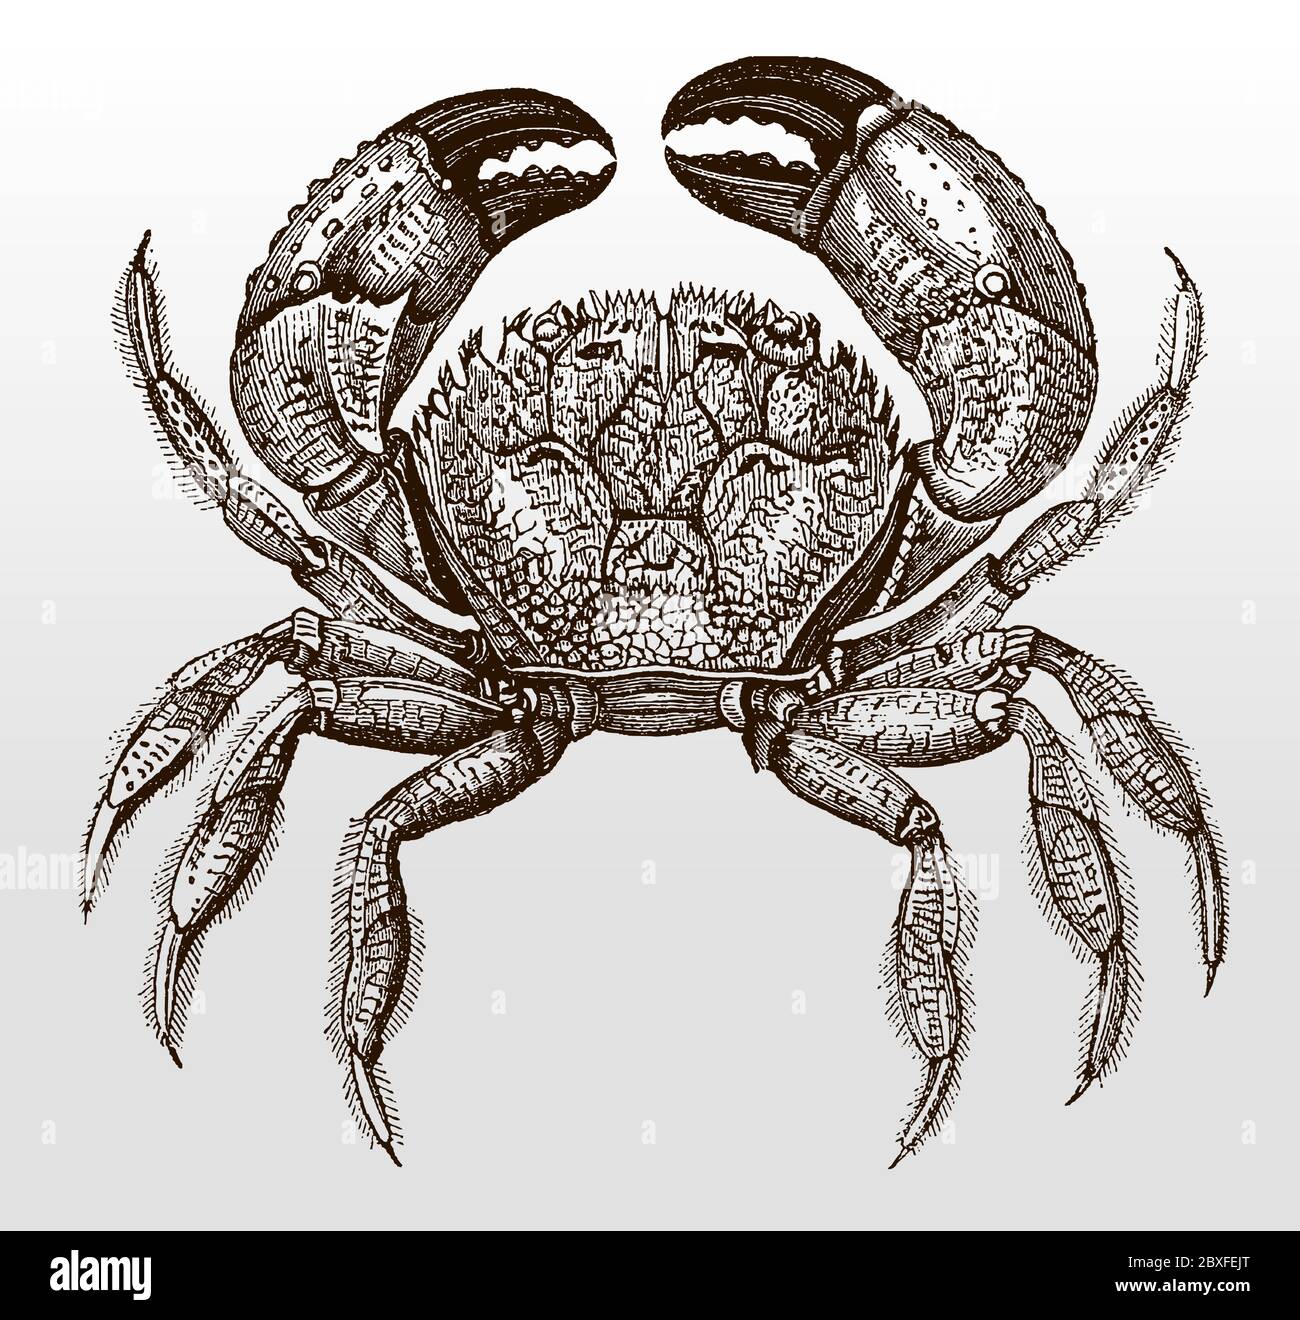 Warty or yellow crab, eriphia verrucosa in top view after an antique illustration from the 19th century Stock Vector